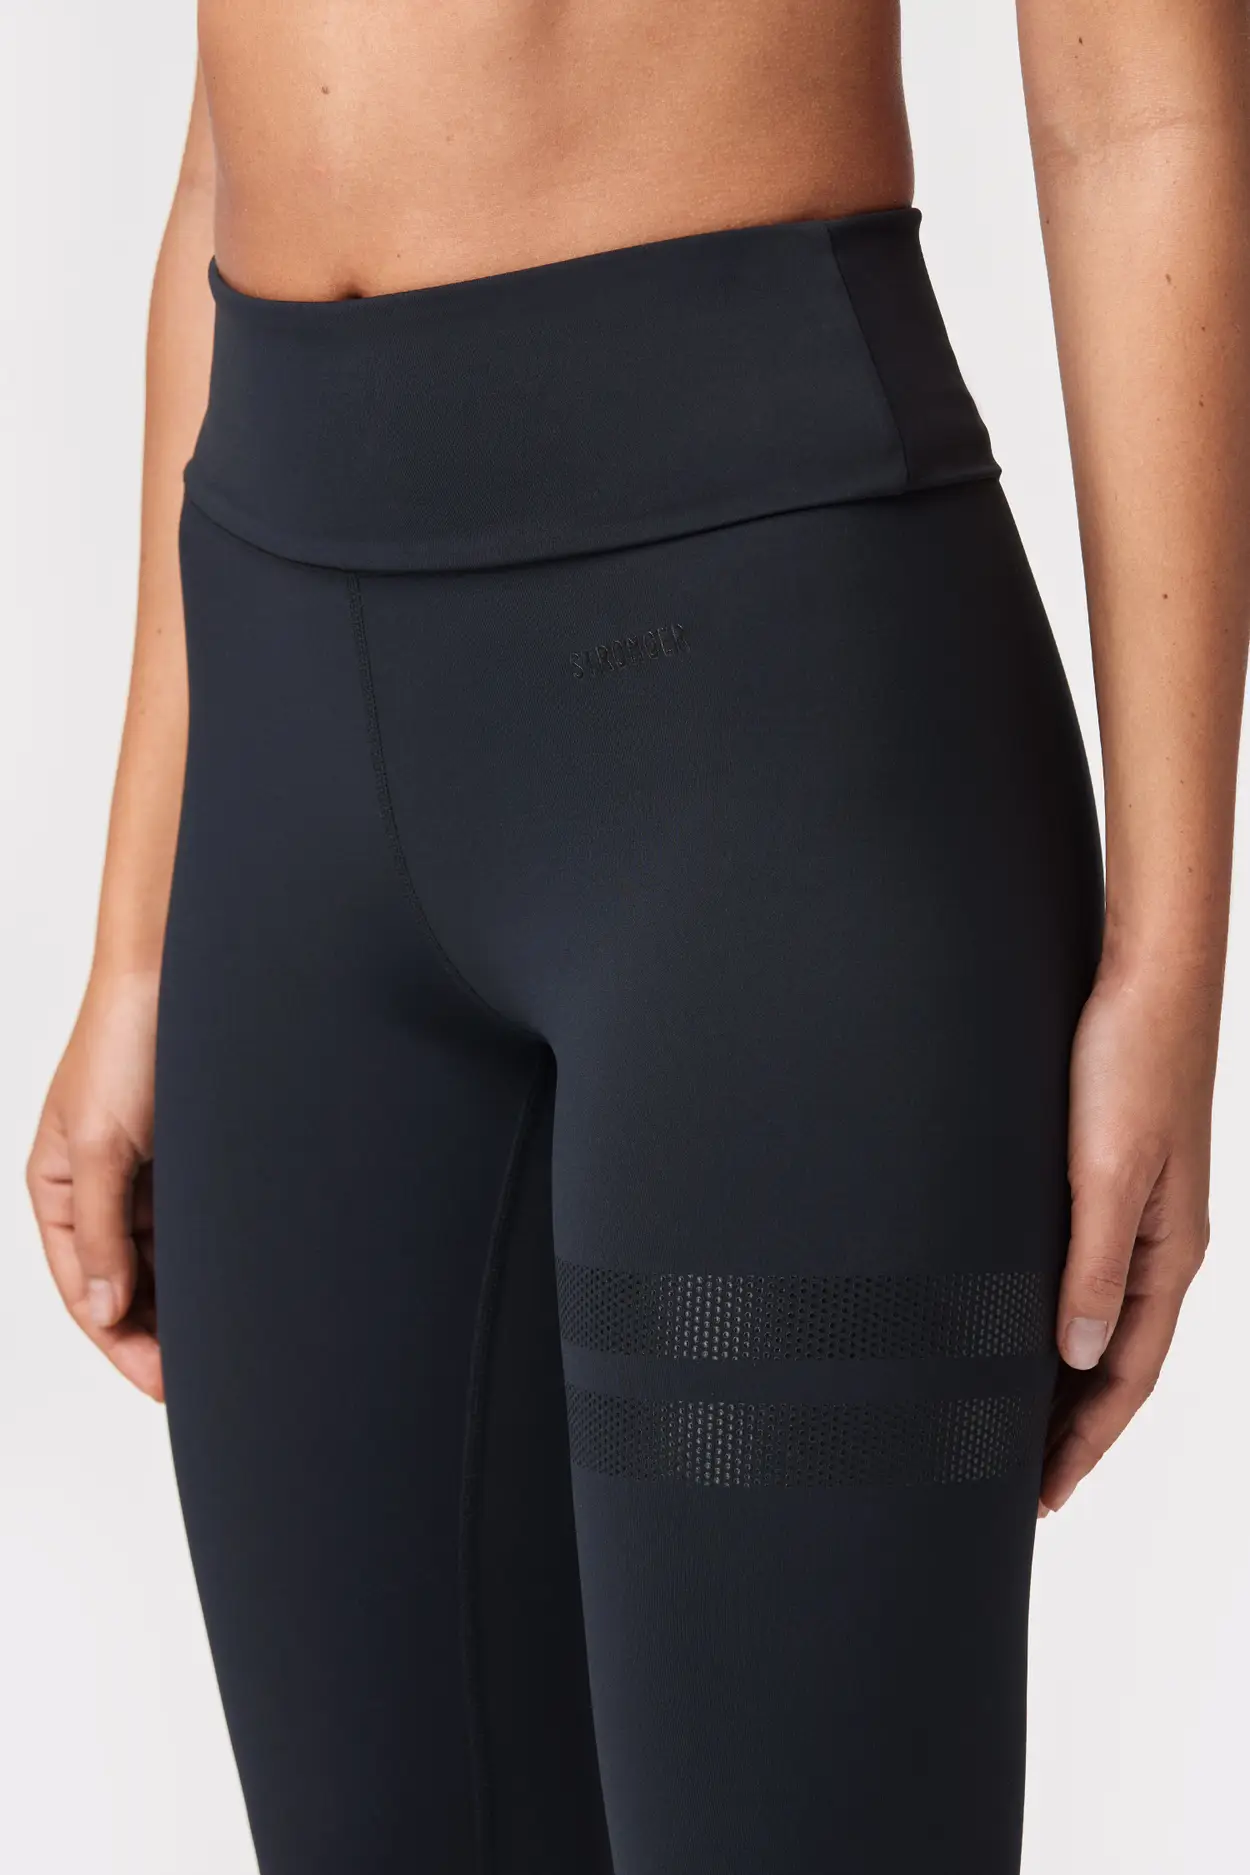 90 Degrees Superflex Madison Crossover Flared Leggings In Black At